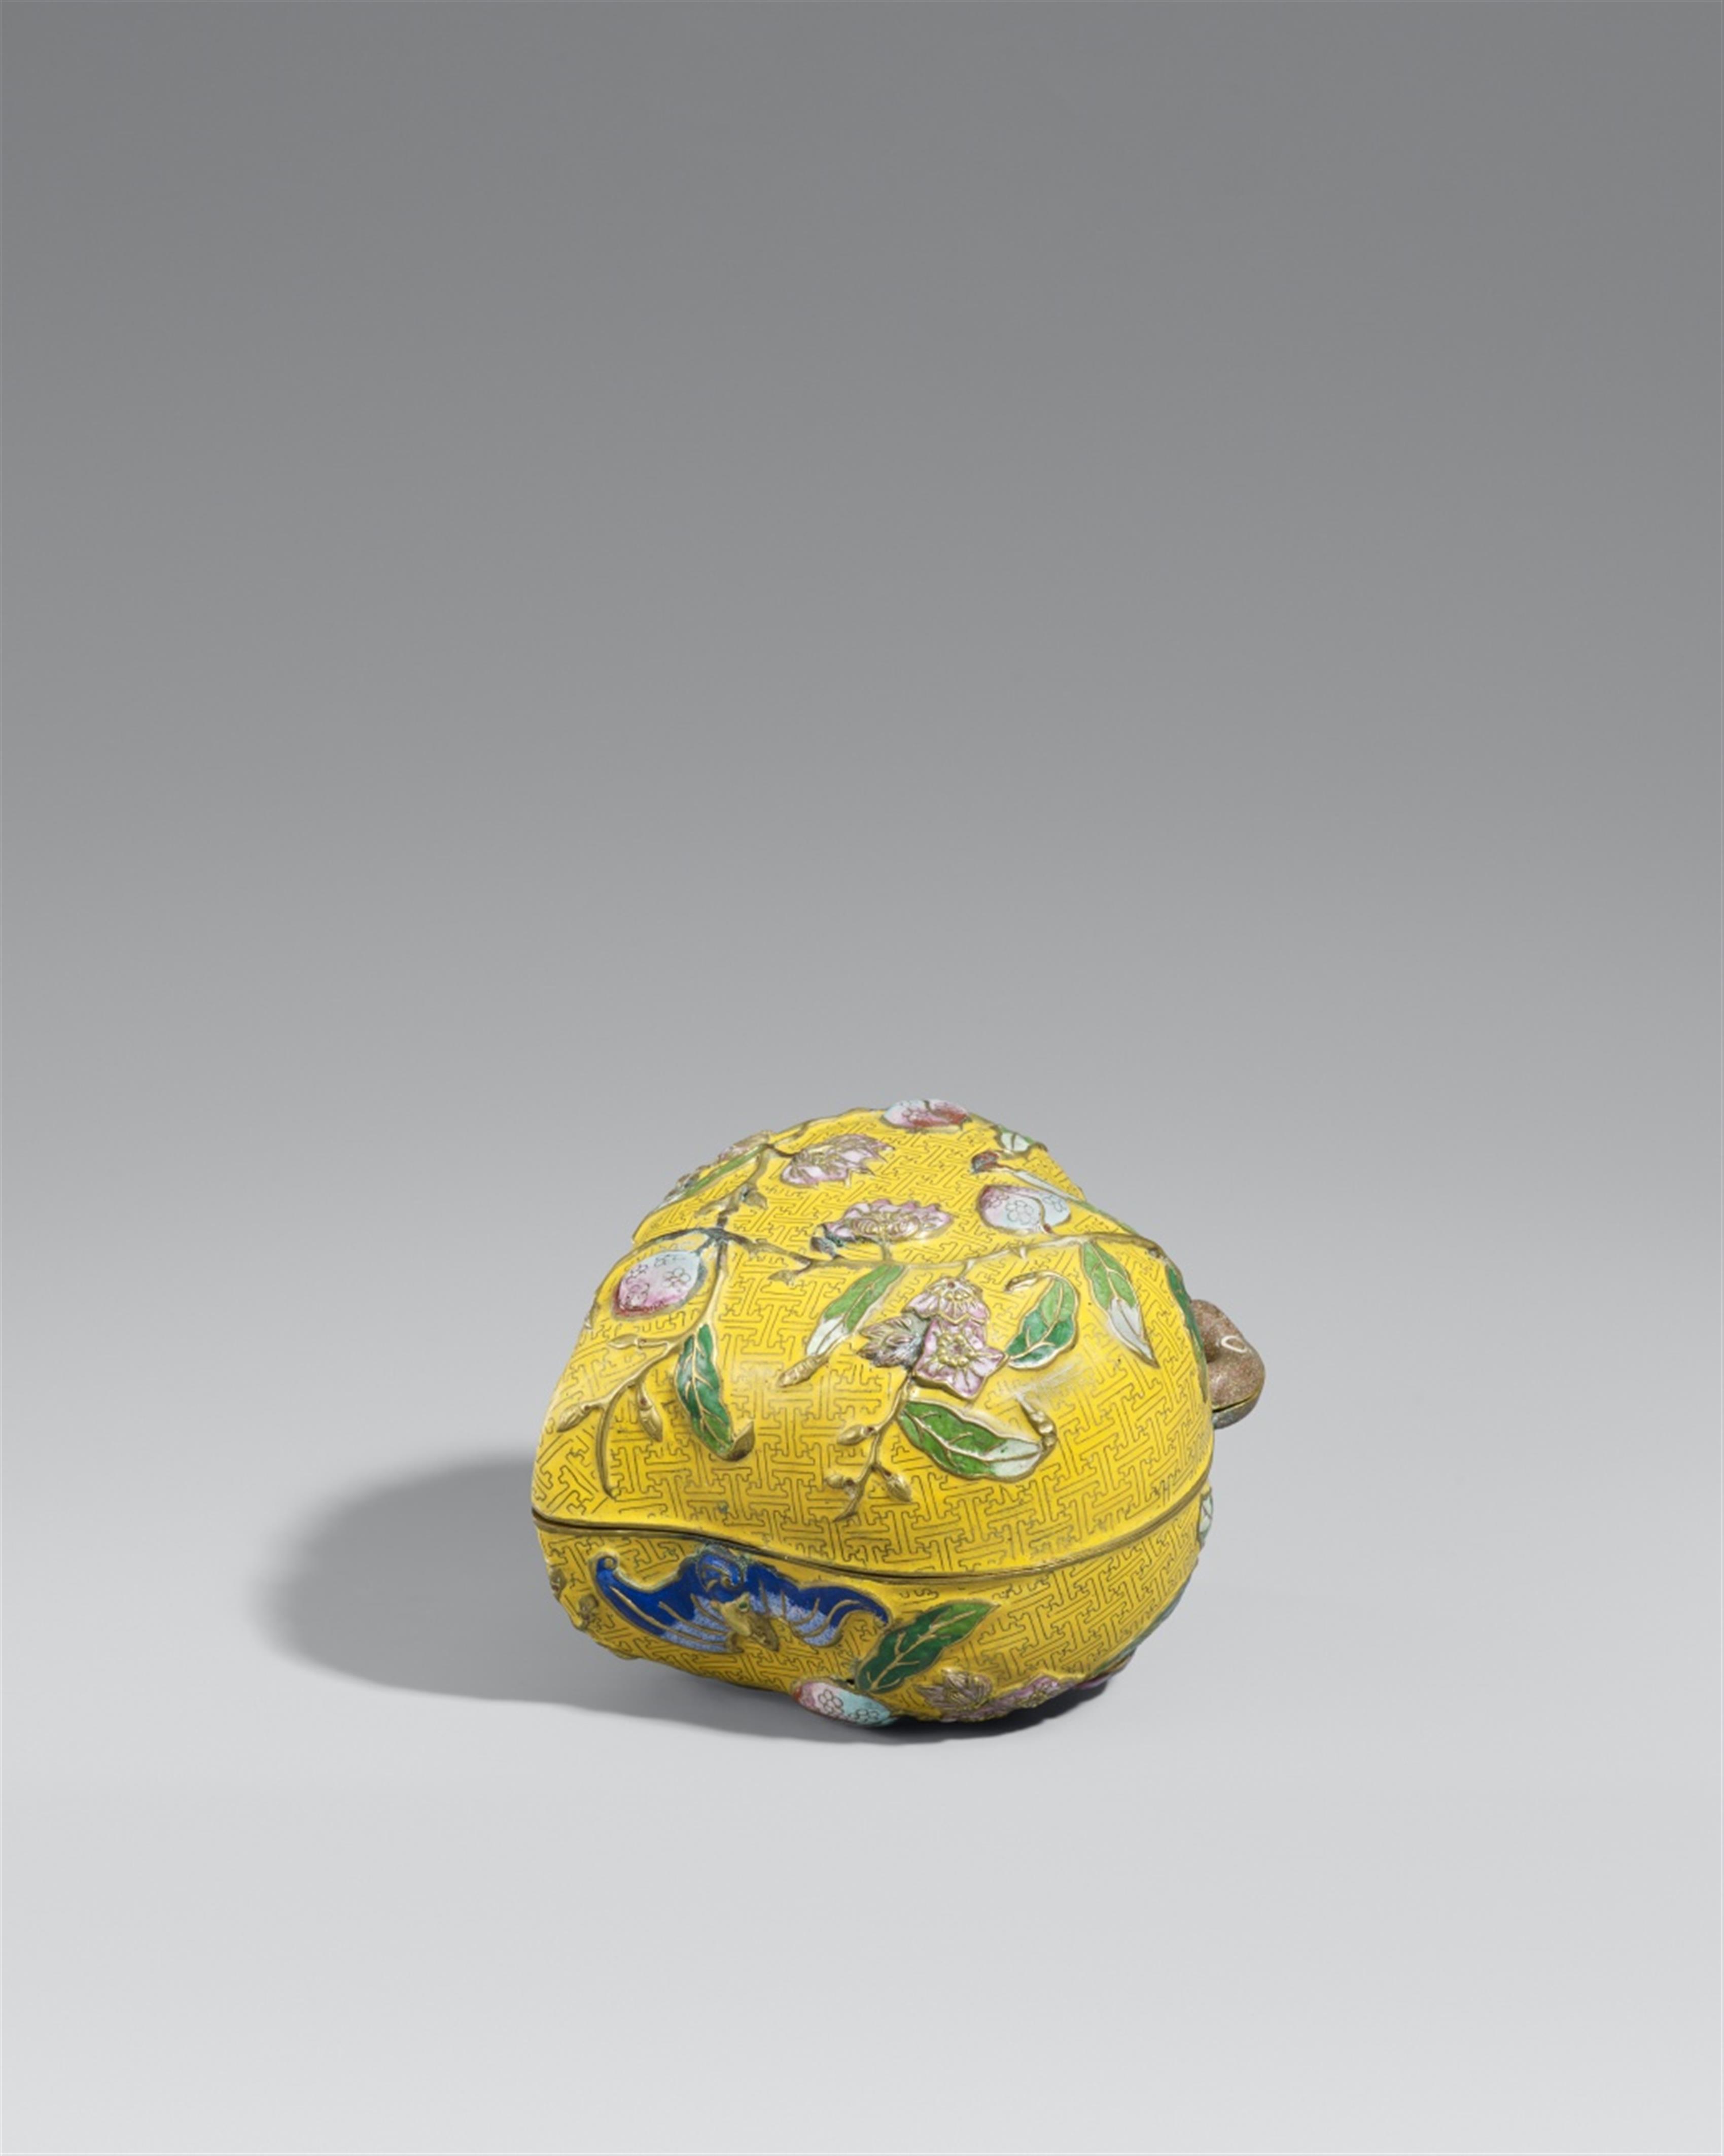 A peach-shaped champlevé and cloisonné enamel lidded box. Around 1900 - image-1